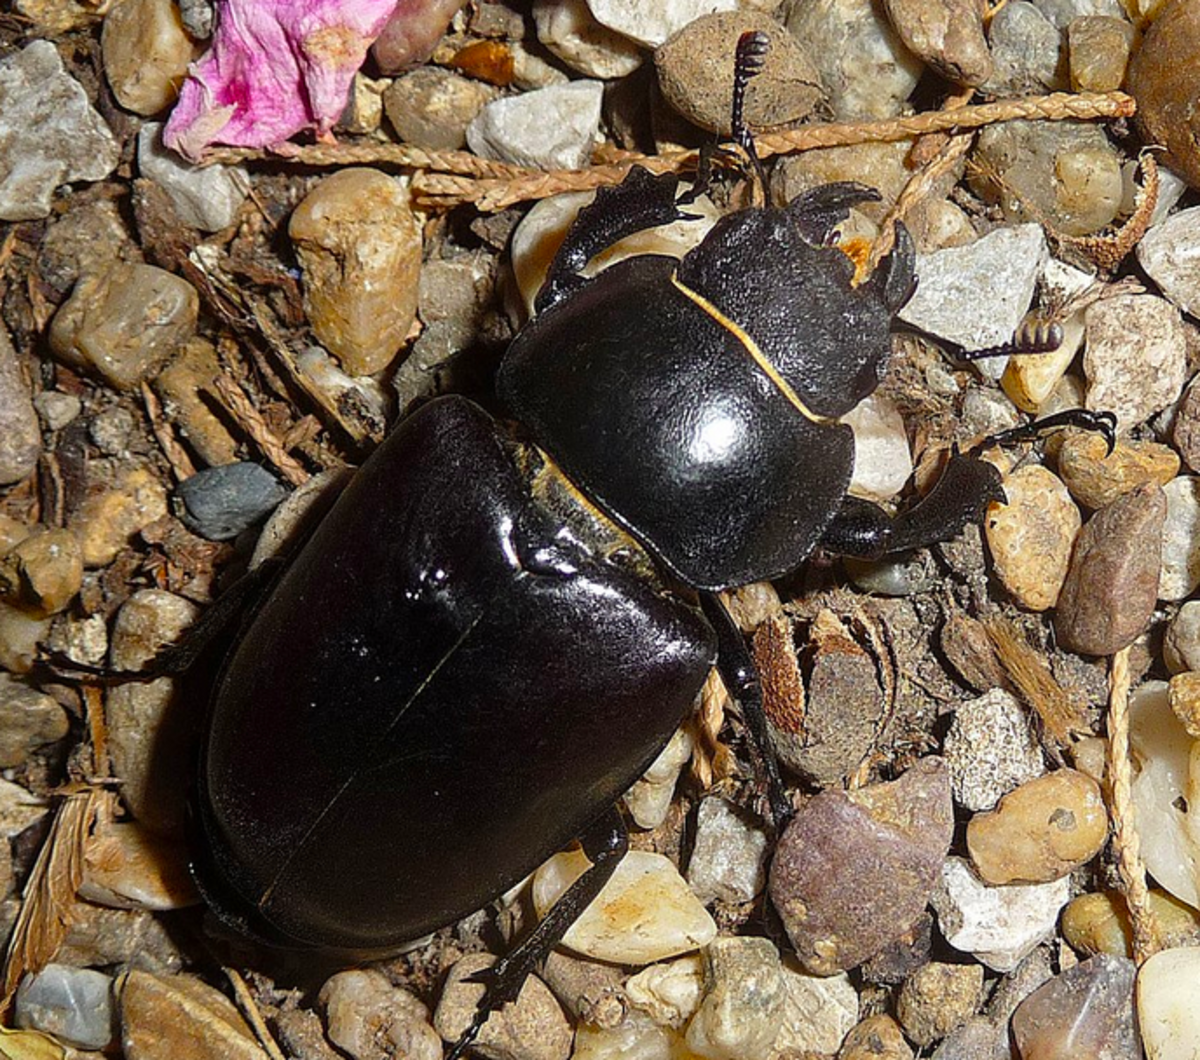 Female stage beetle, showing short, strong mandibles